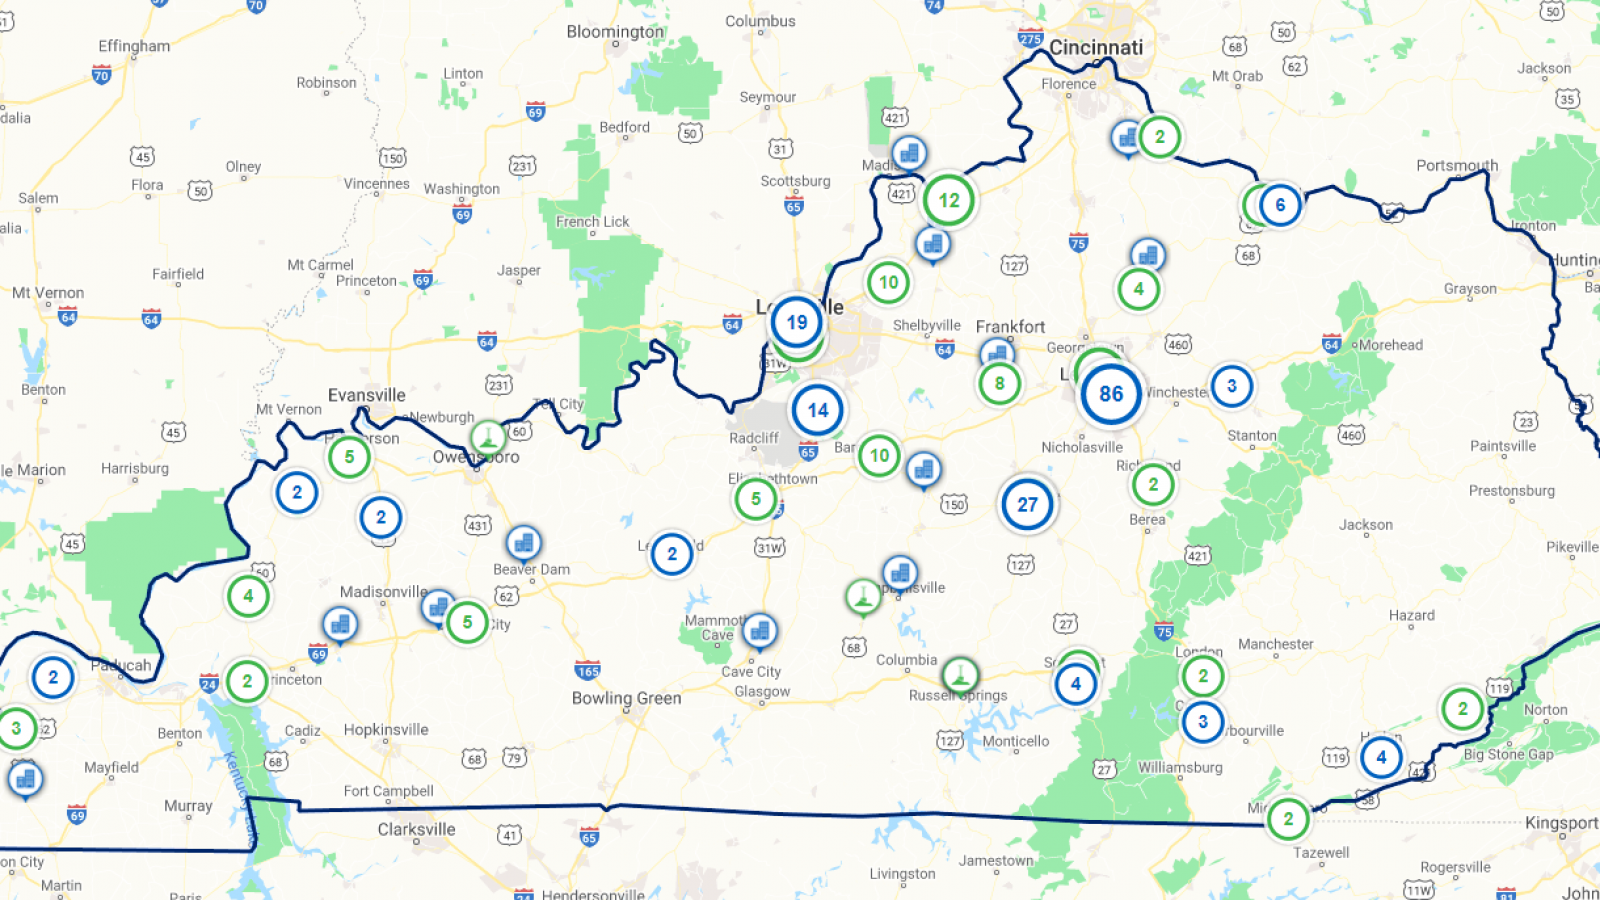 map of Kentucky showing circles where properties are available